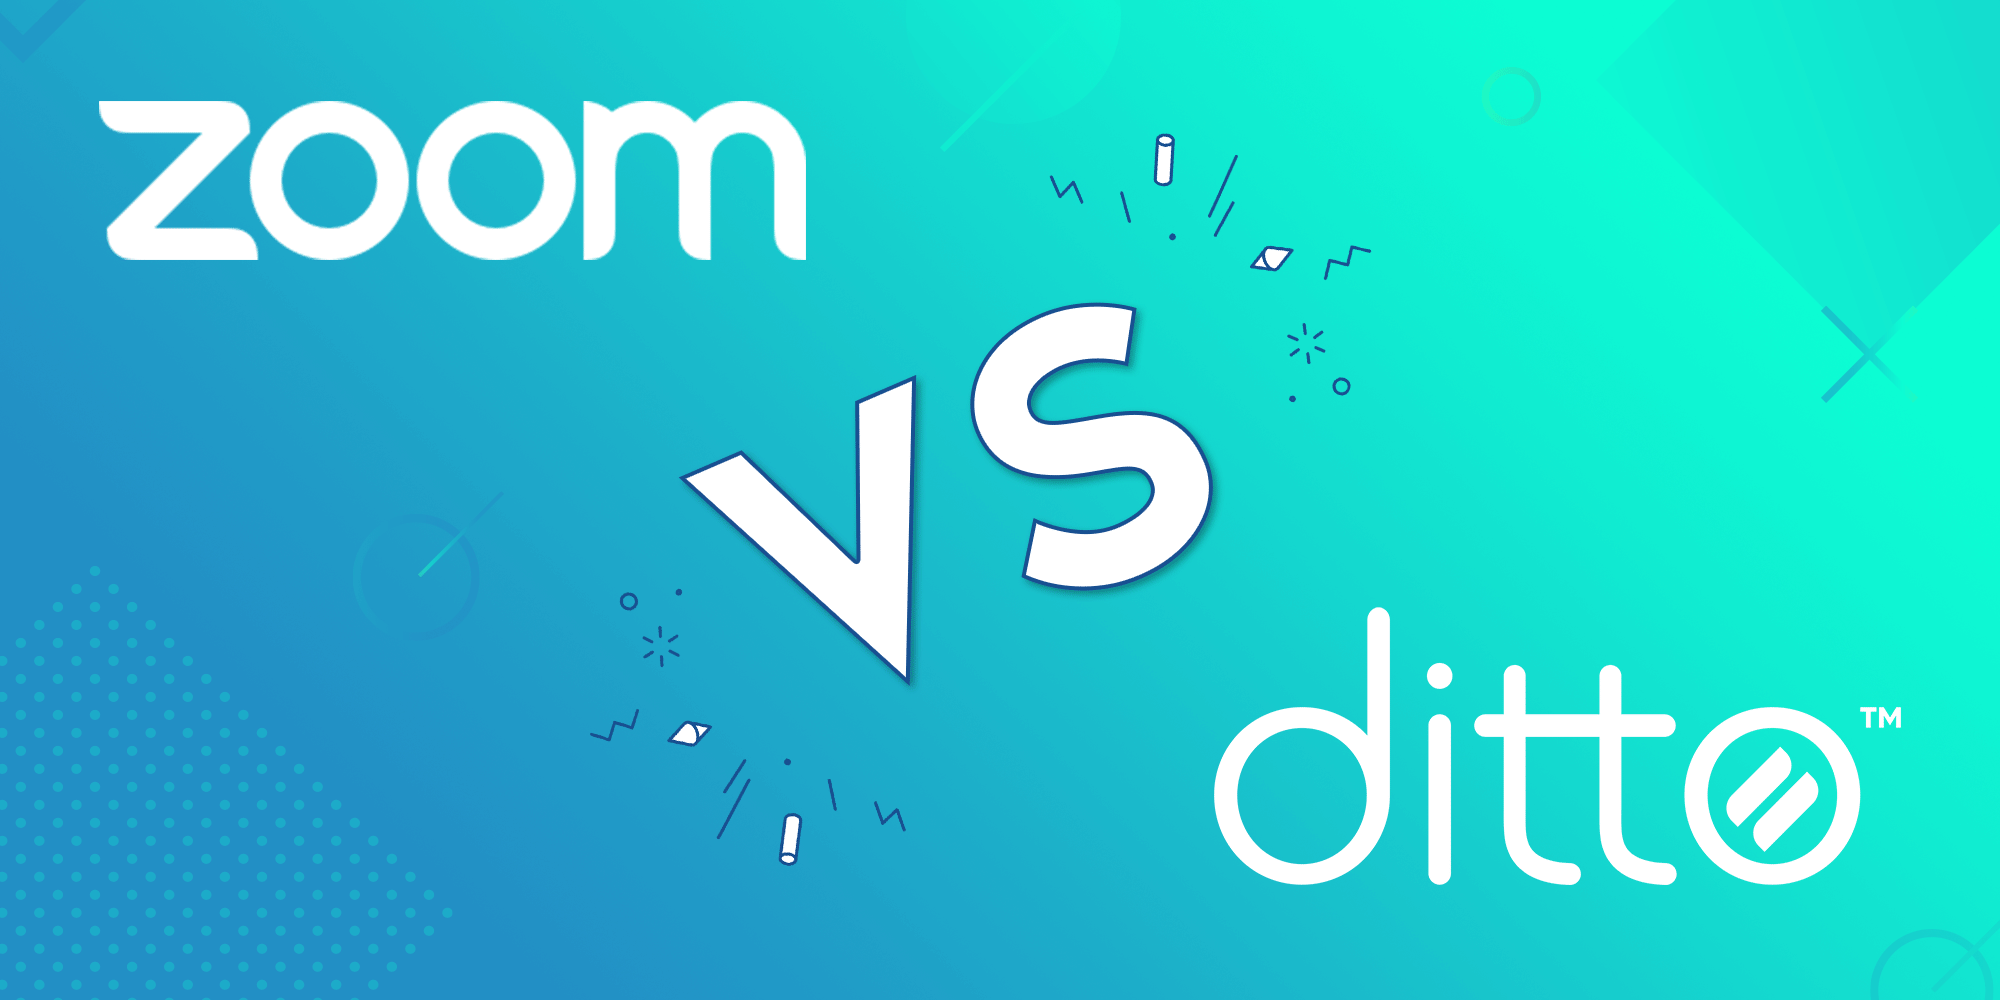 Ditto vs. Zoom Rooms